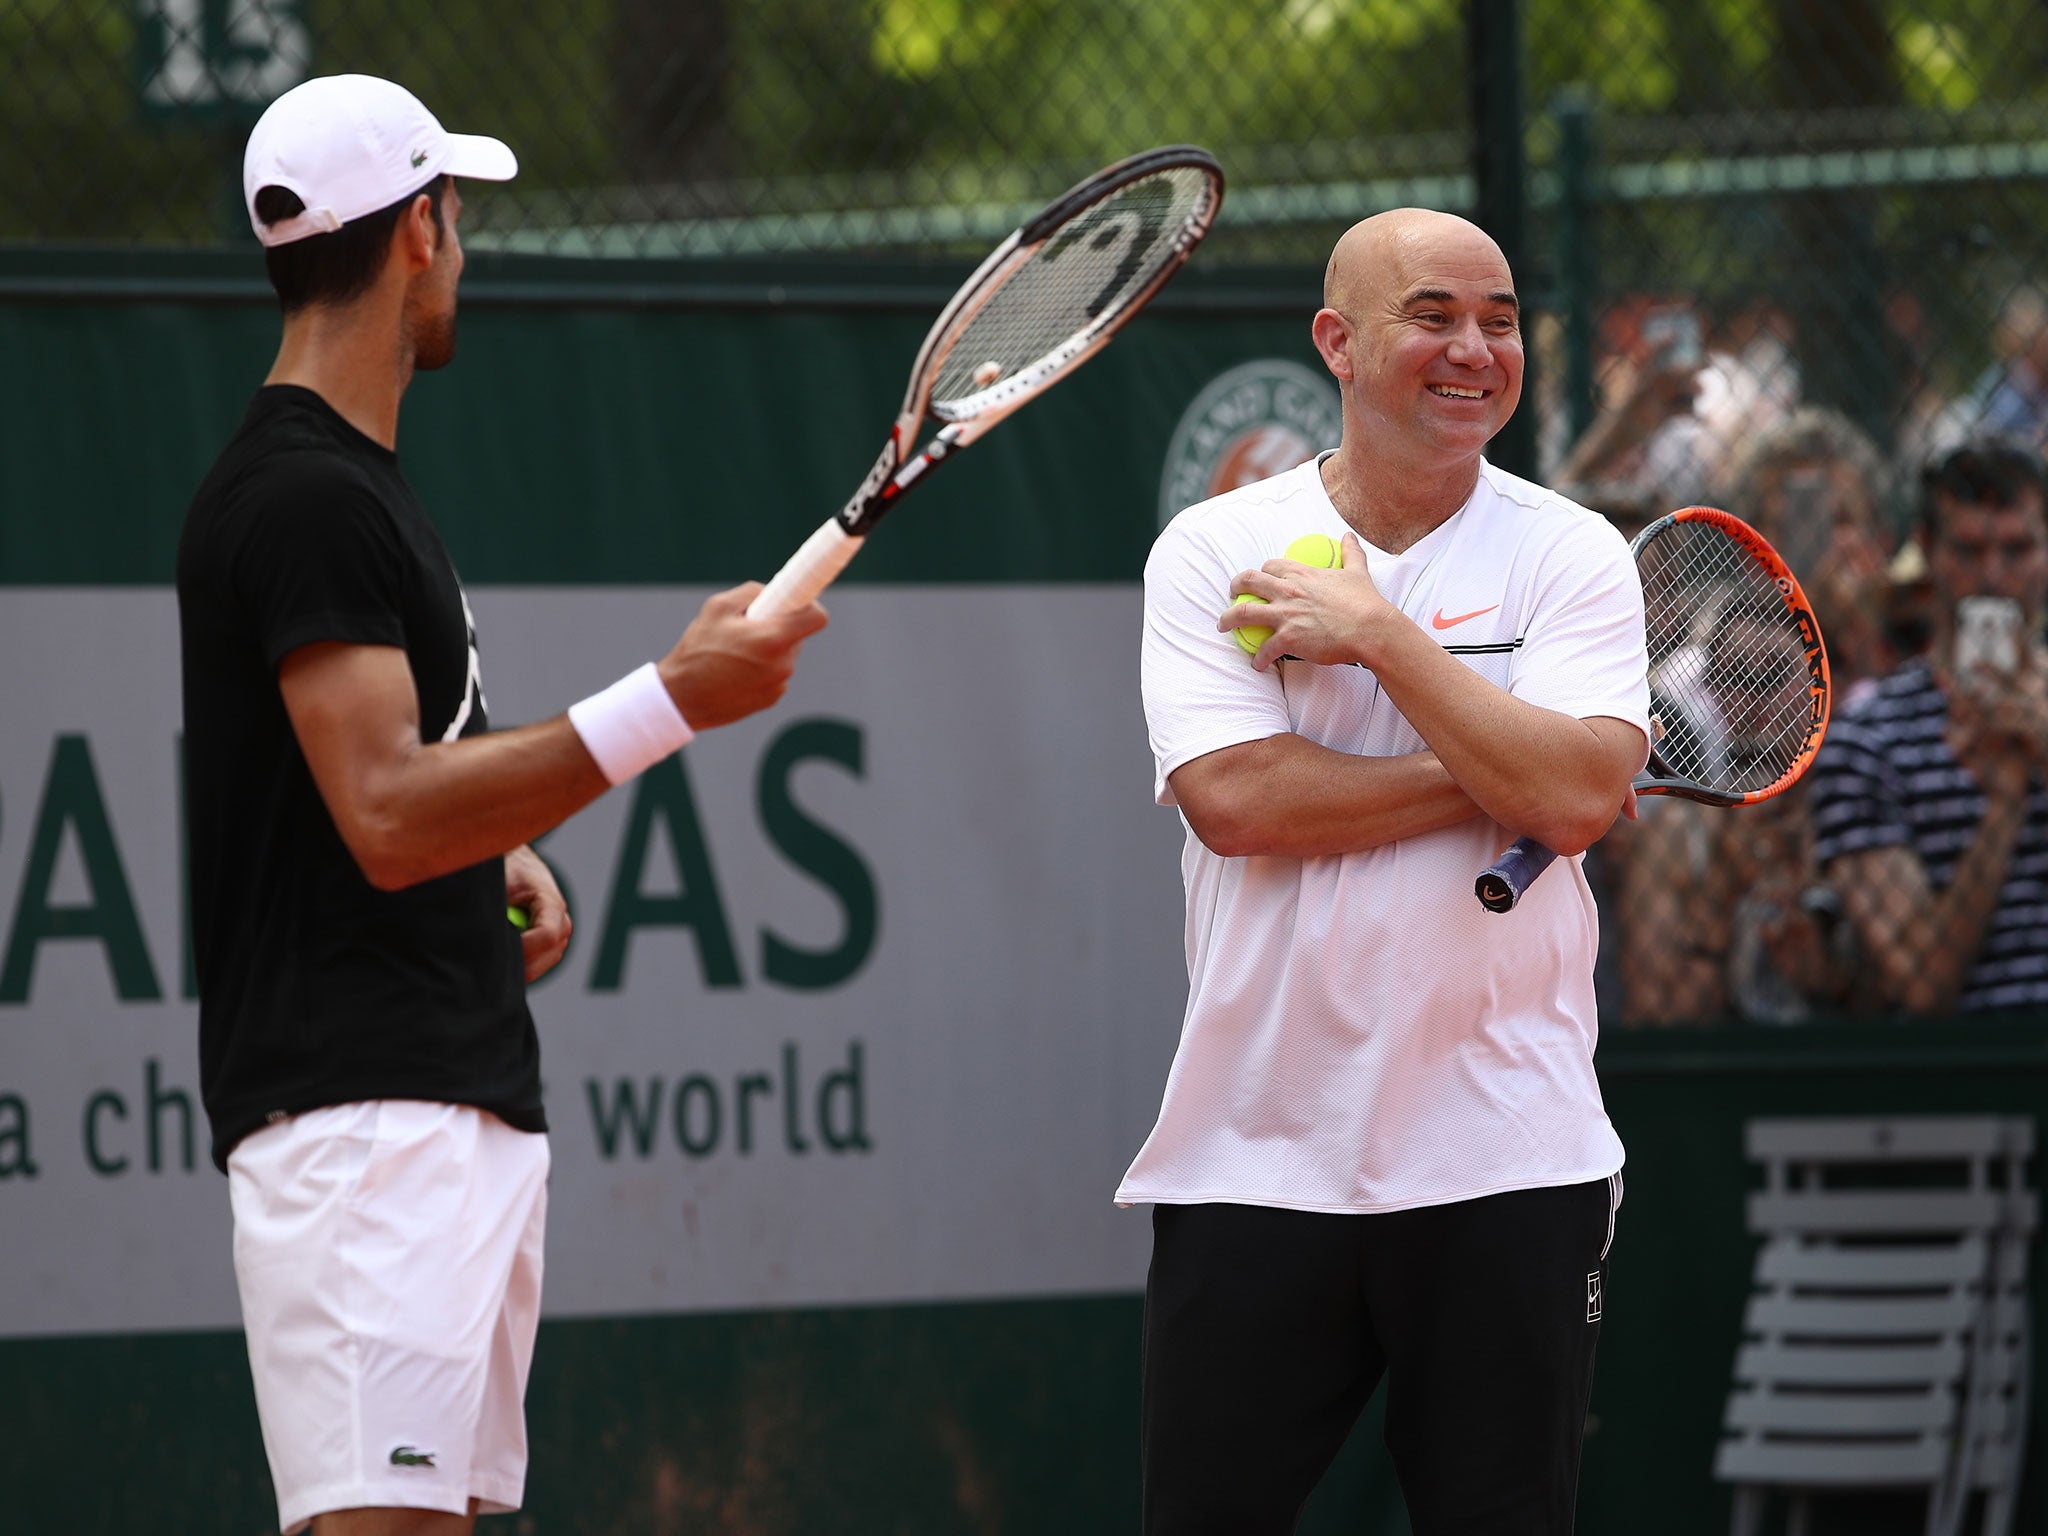 Agassi and Djokovic worked together at Roland Garros